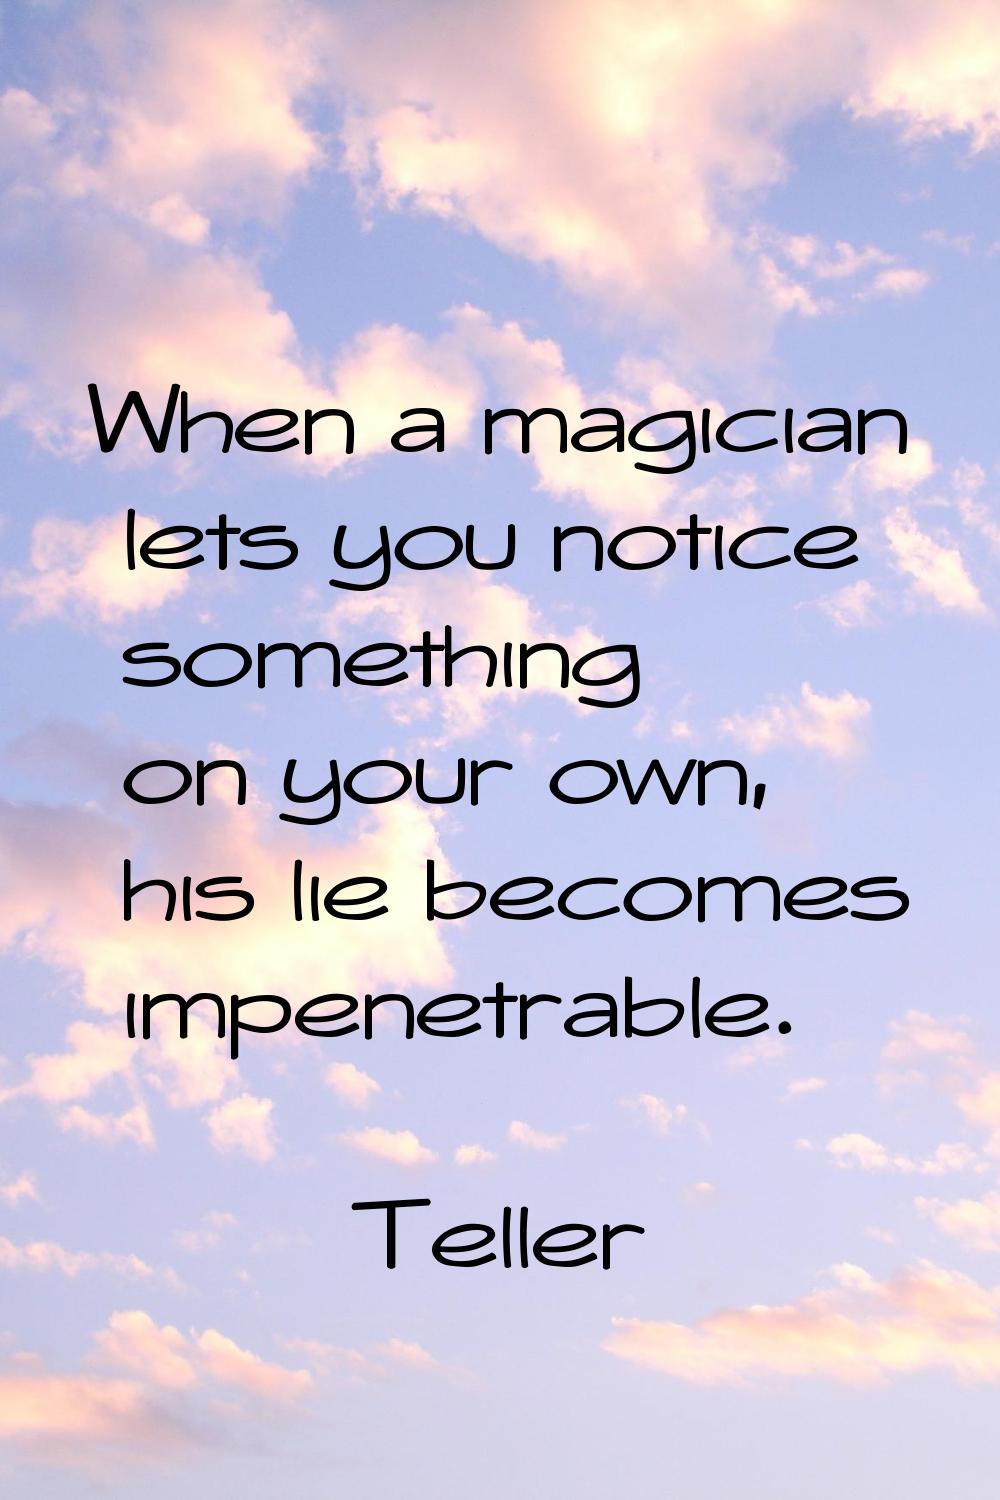 When a magician lets you notice something on your own, his lie becomes impenetrable.